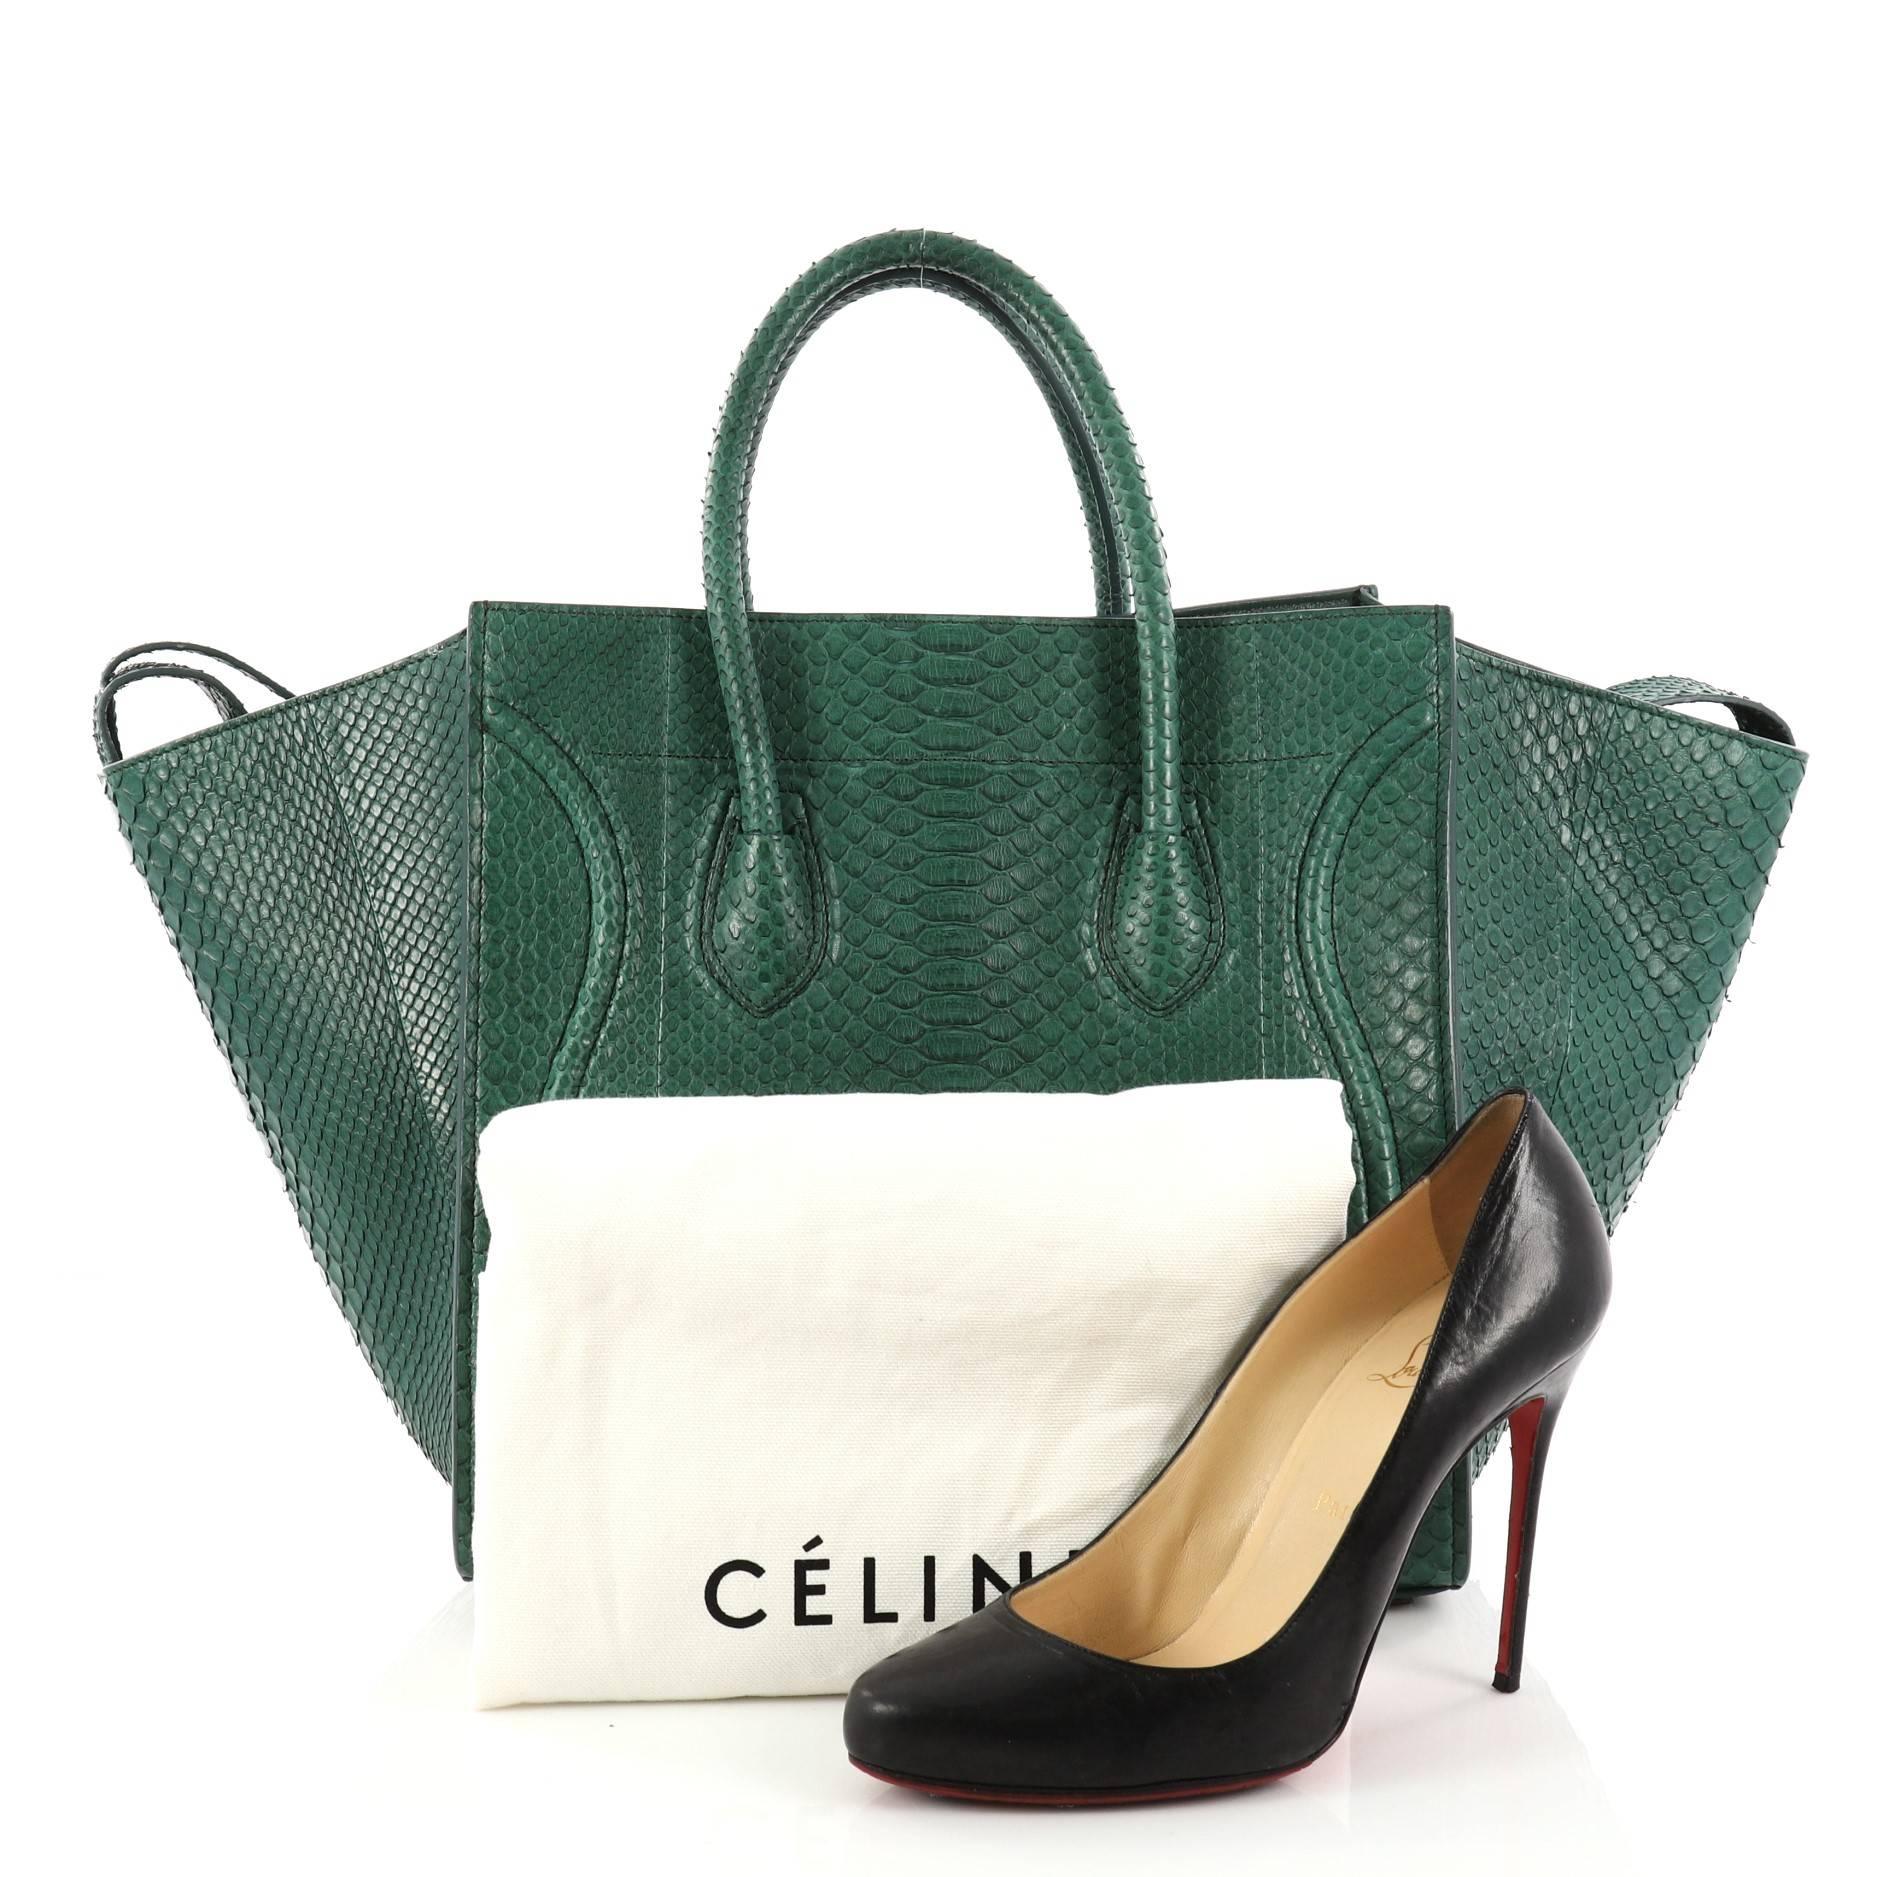 This authentic Celine Phantom Handbag Python Medium by Phoebe Philo mixes classic minimalist Celine style with casual luxe detailing. Crafted from genuine green python skin, this ultra-chic bag features exterior front zip pocket with braided zipper